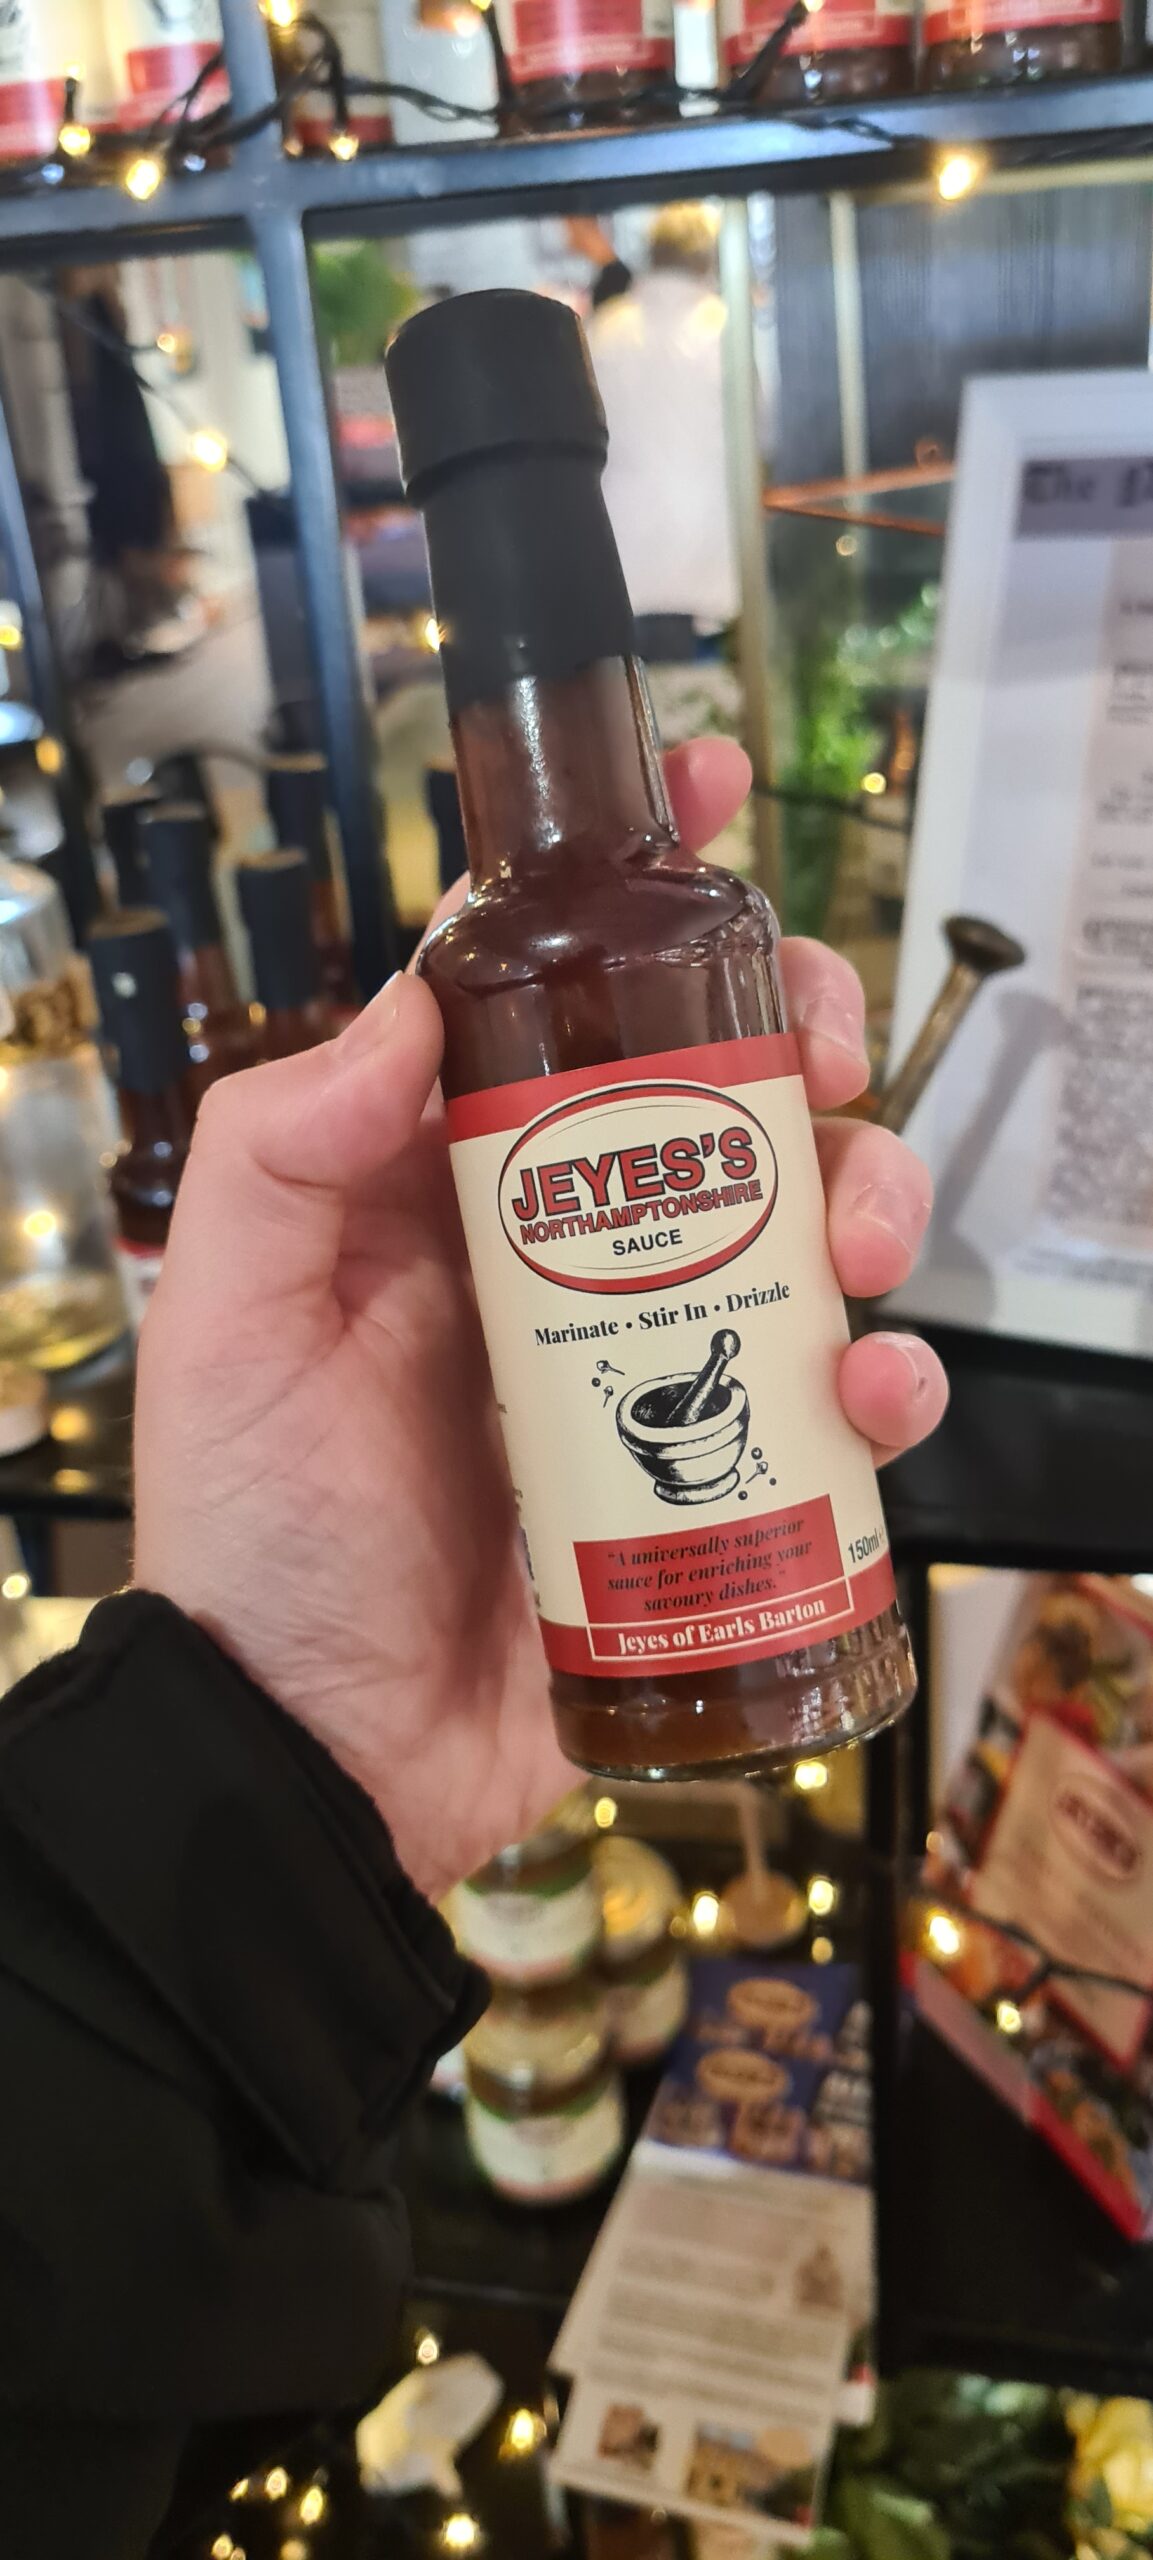 IMAGE: Jeyes's Northamptonshire Sauce. A dark brown bottle with a beige label. Red accents and a mortar and pestle sketch.